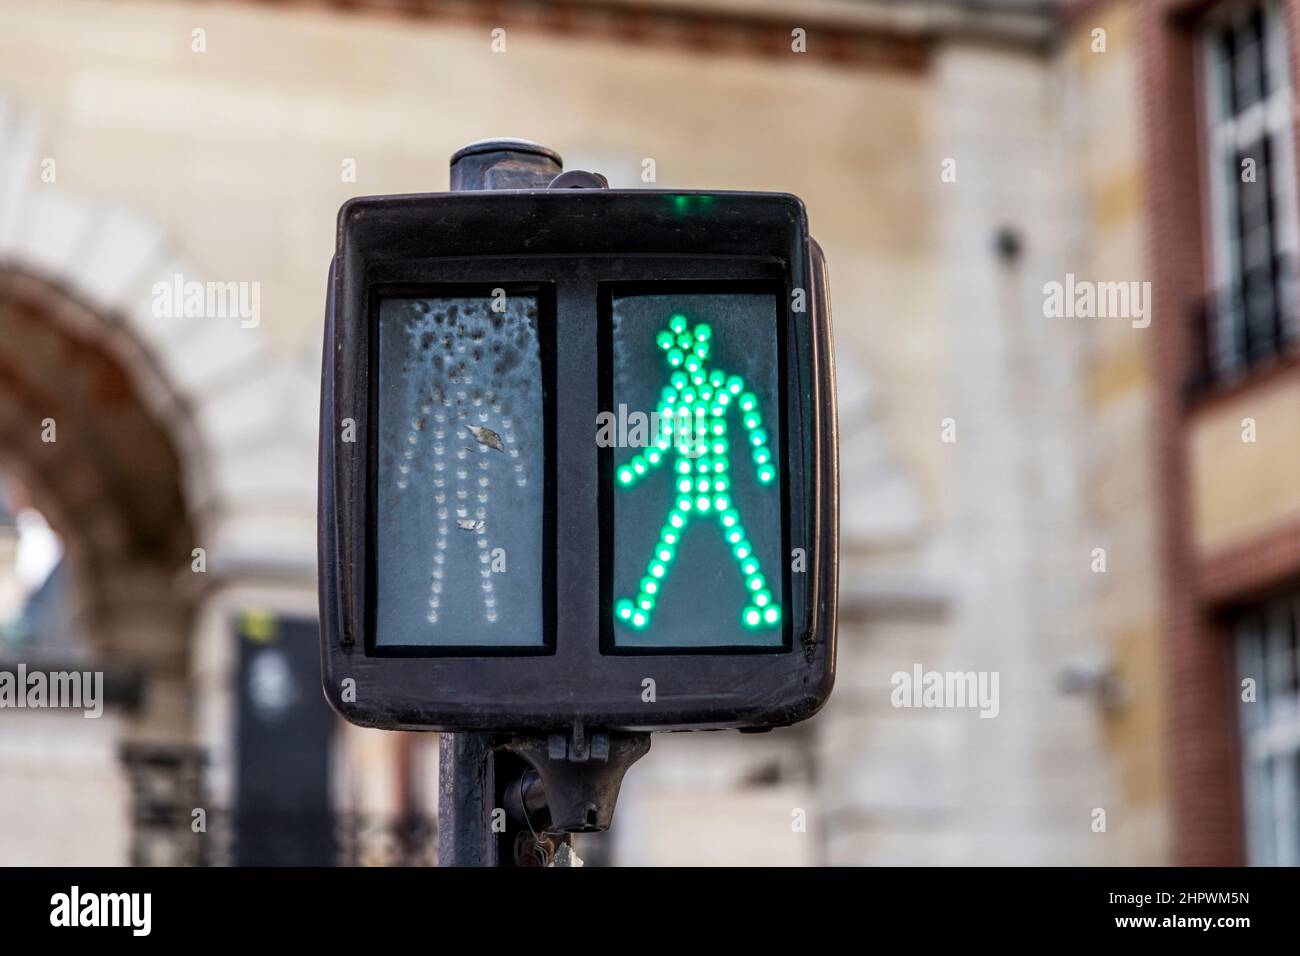 green man at traffic light shows right to walk over the pedestrian crossing way Stock Photo